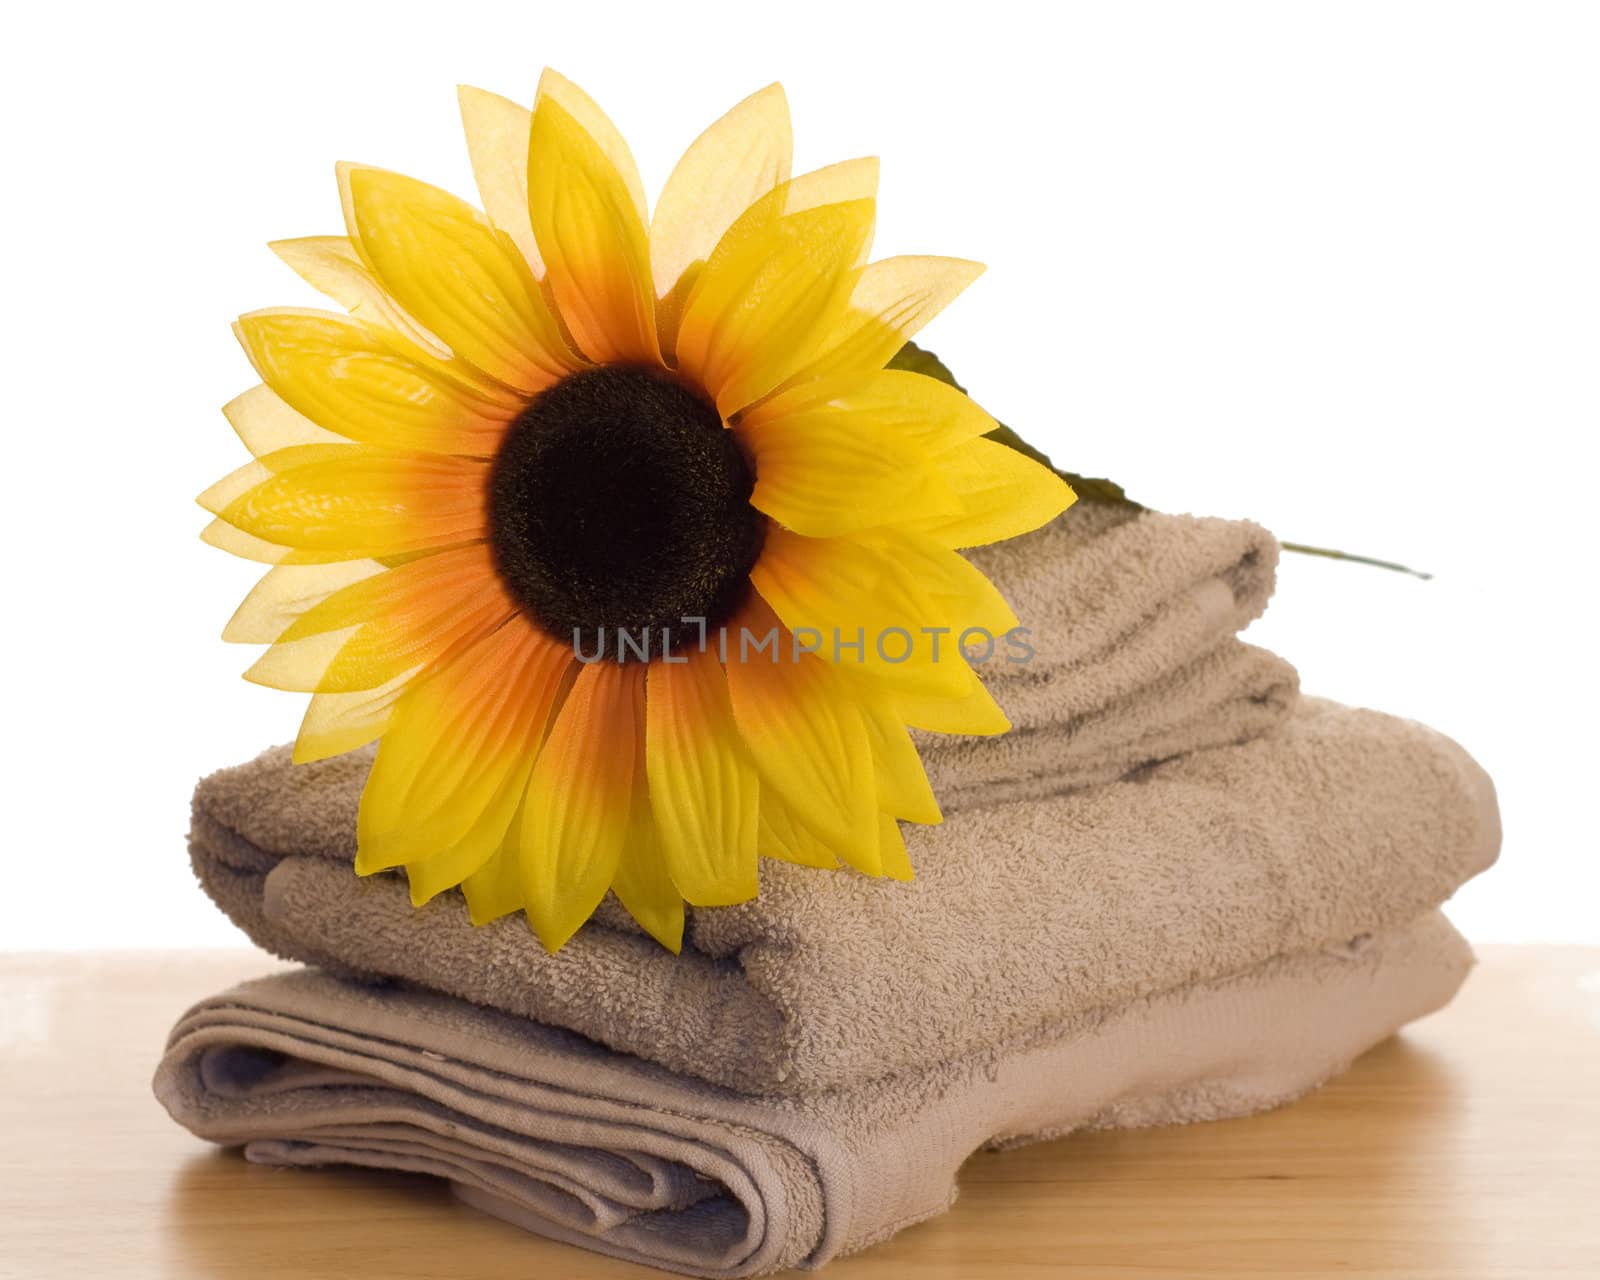 An artificial sunflower resting on some towels